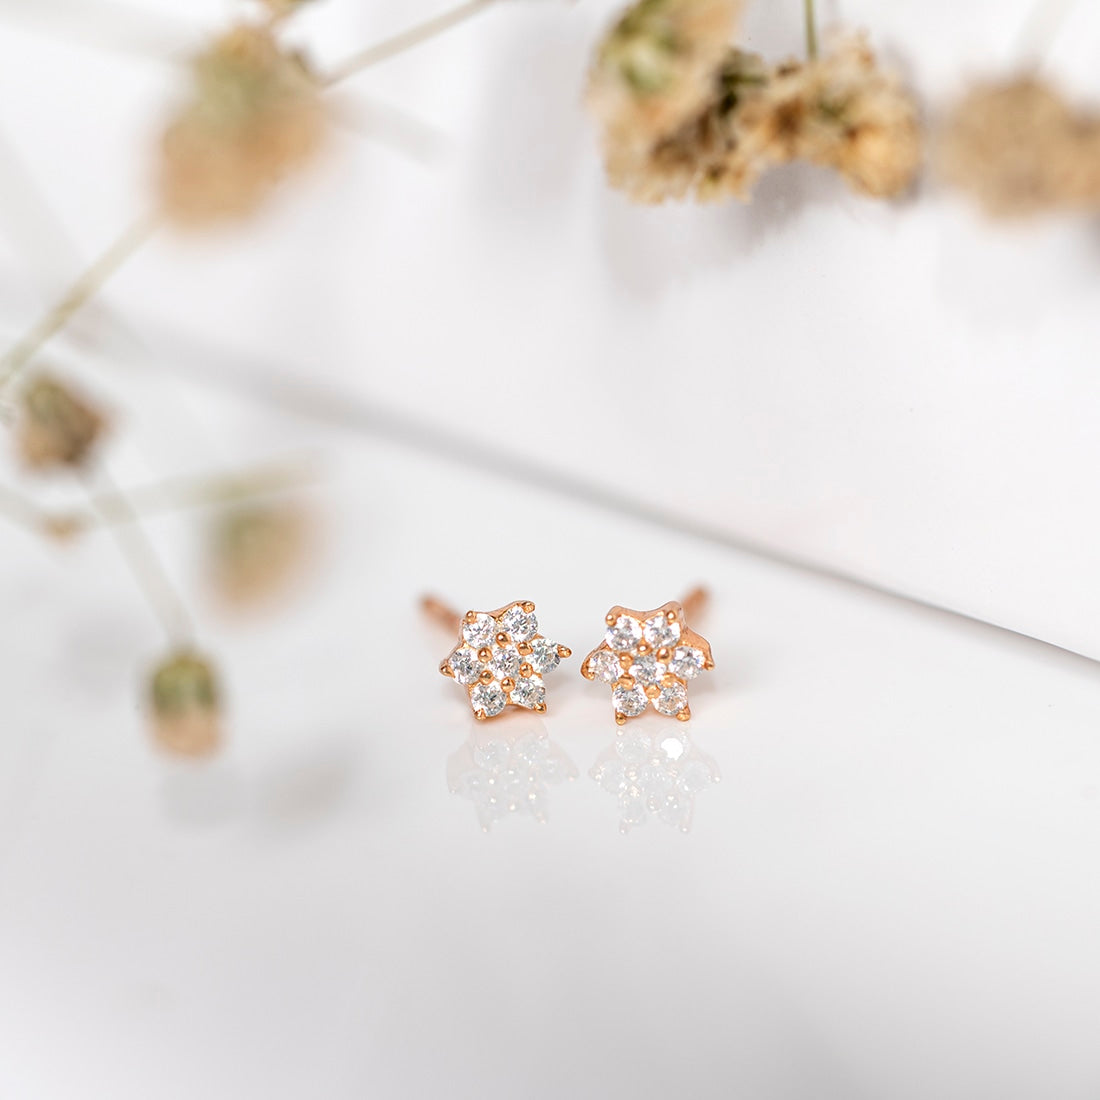 Queen Bee Gold and Diamond Stud Earrings | Designer Fine Jewelry by Sara  Weinstock